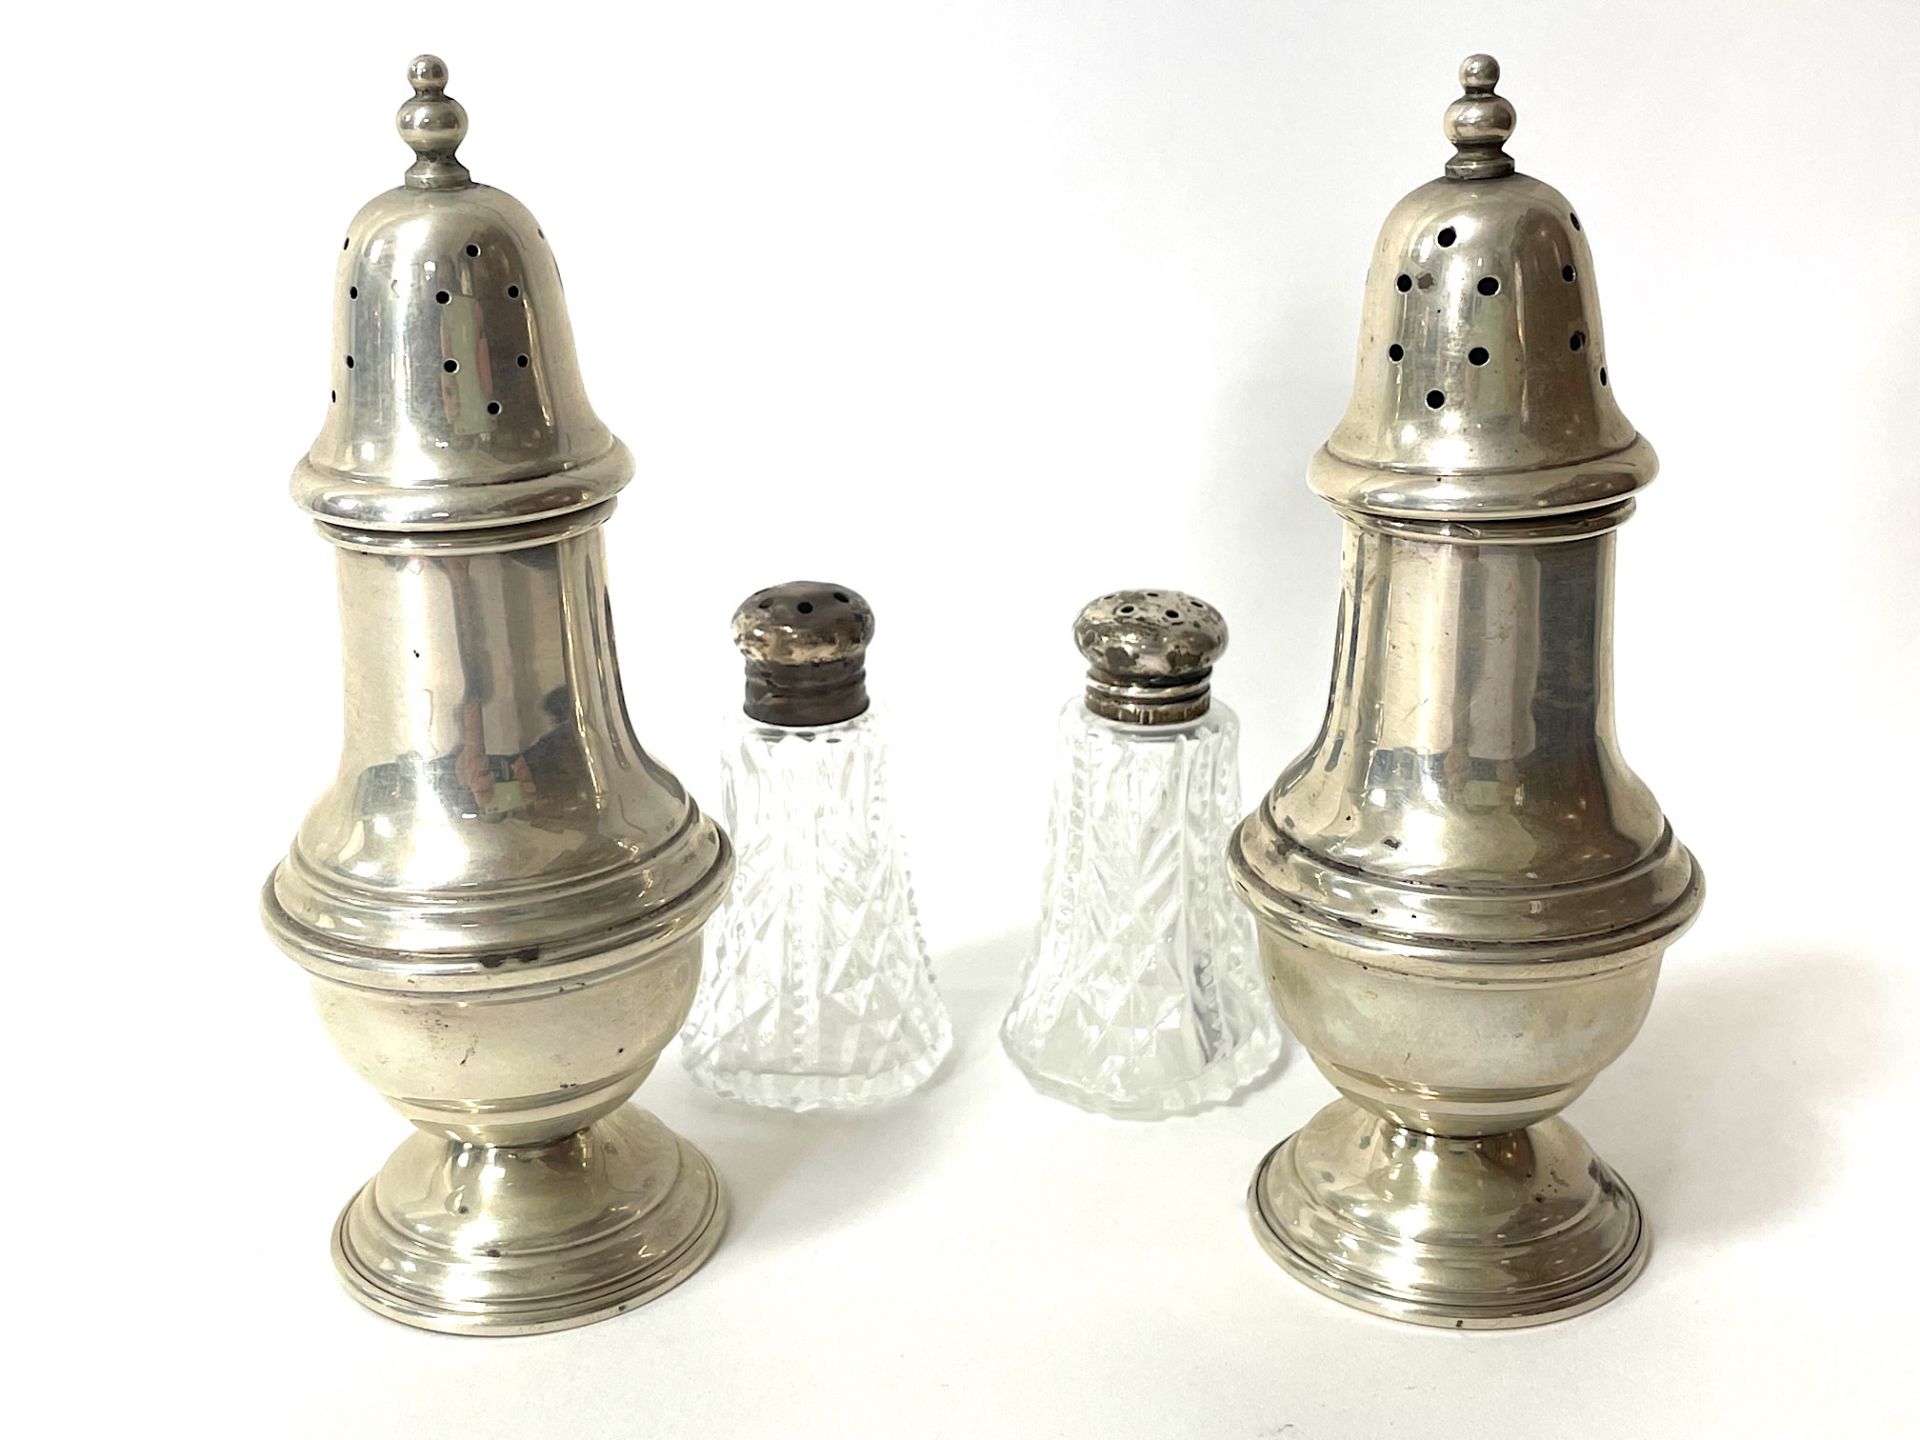 40 pairs of salt/pepper and spice shakers, - Image 38 of 88